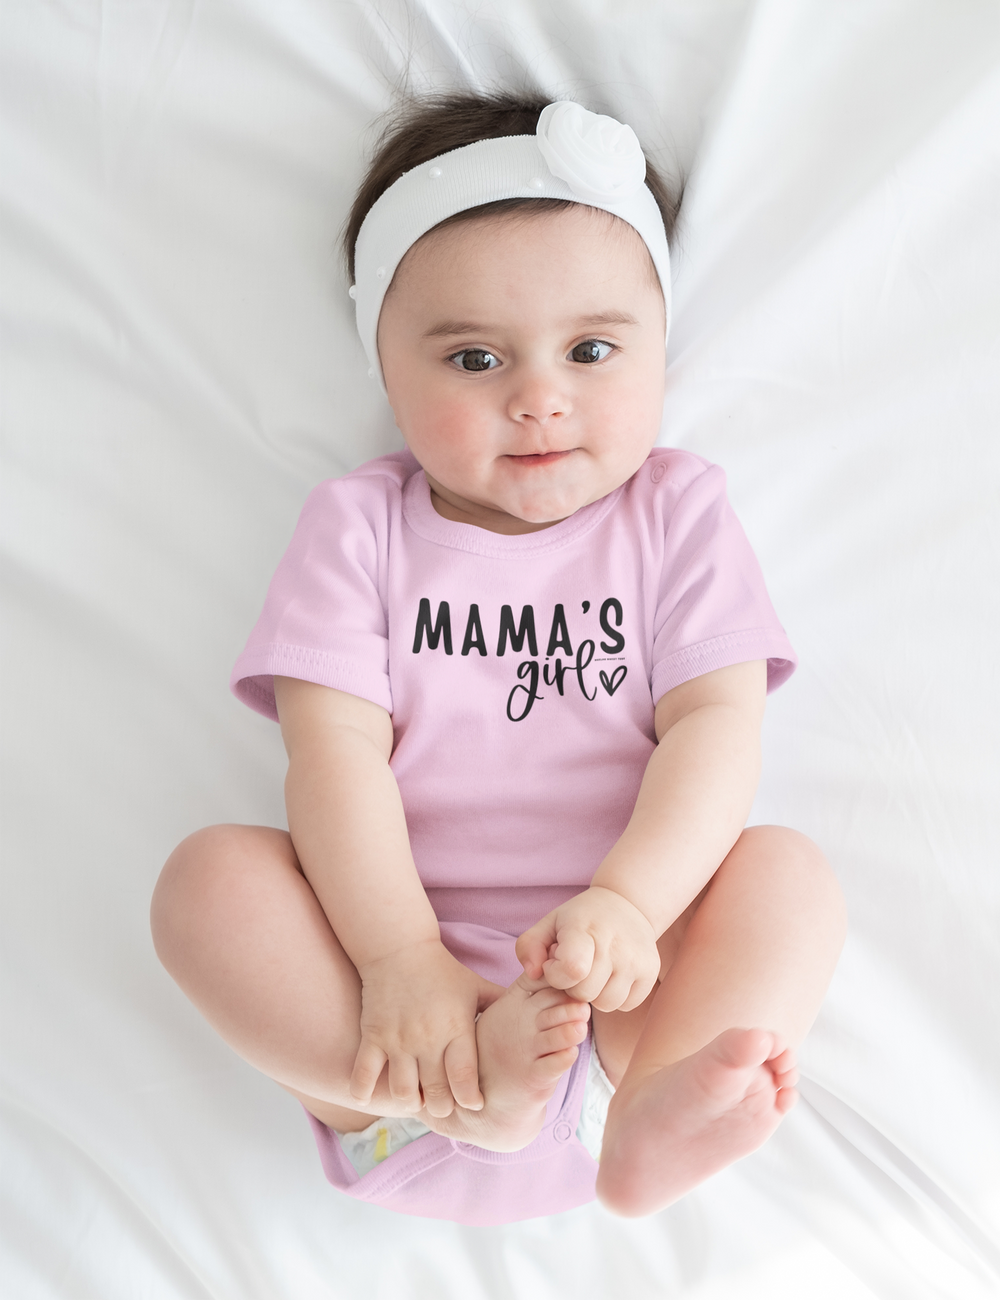 Infant fine jersey bodysuit featuring Mama's Girl Onesie. 100% cotton fabric, ribbed knit bindings, plastic snaps for easy changing. Close-up of a baby in a pink shirt, with a focus on the baby's face, feet, and hands.